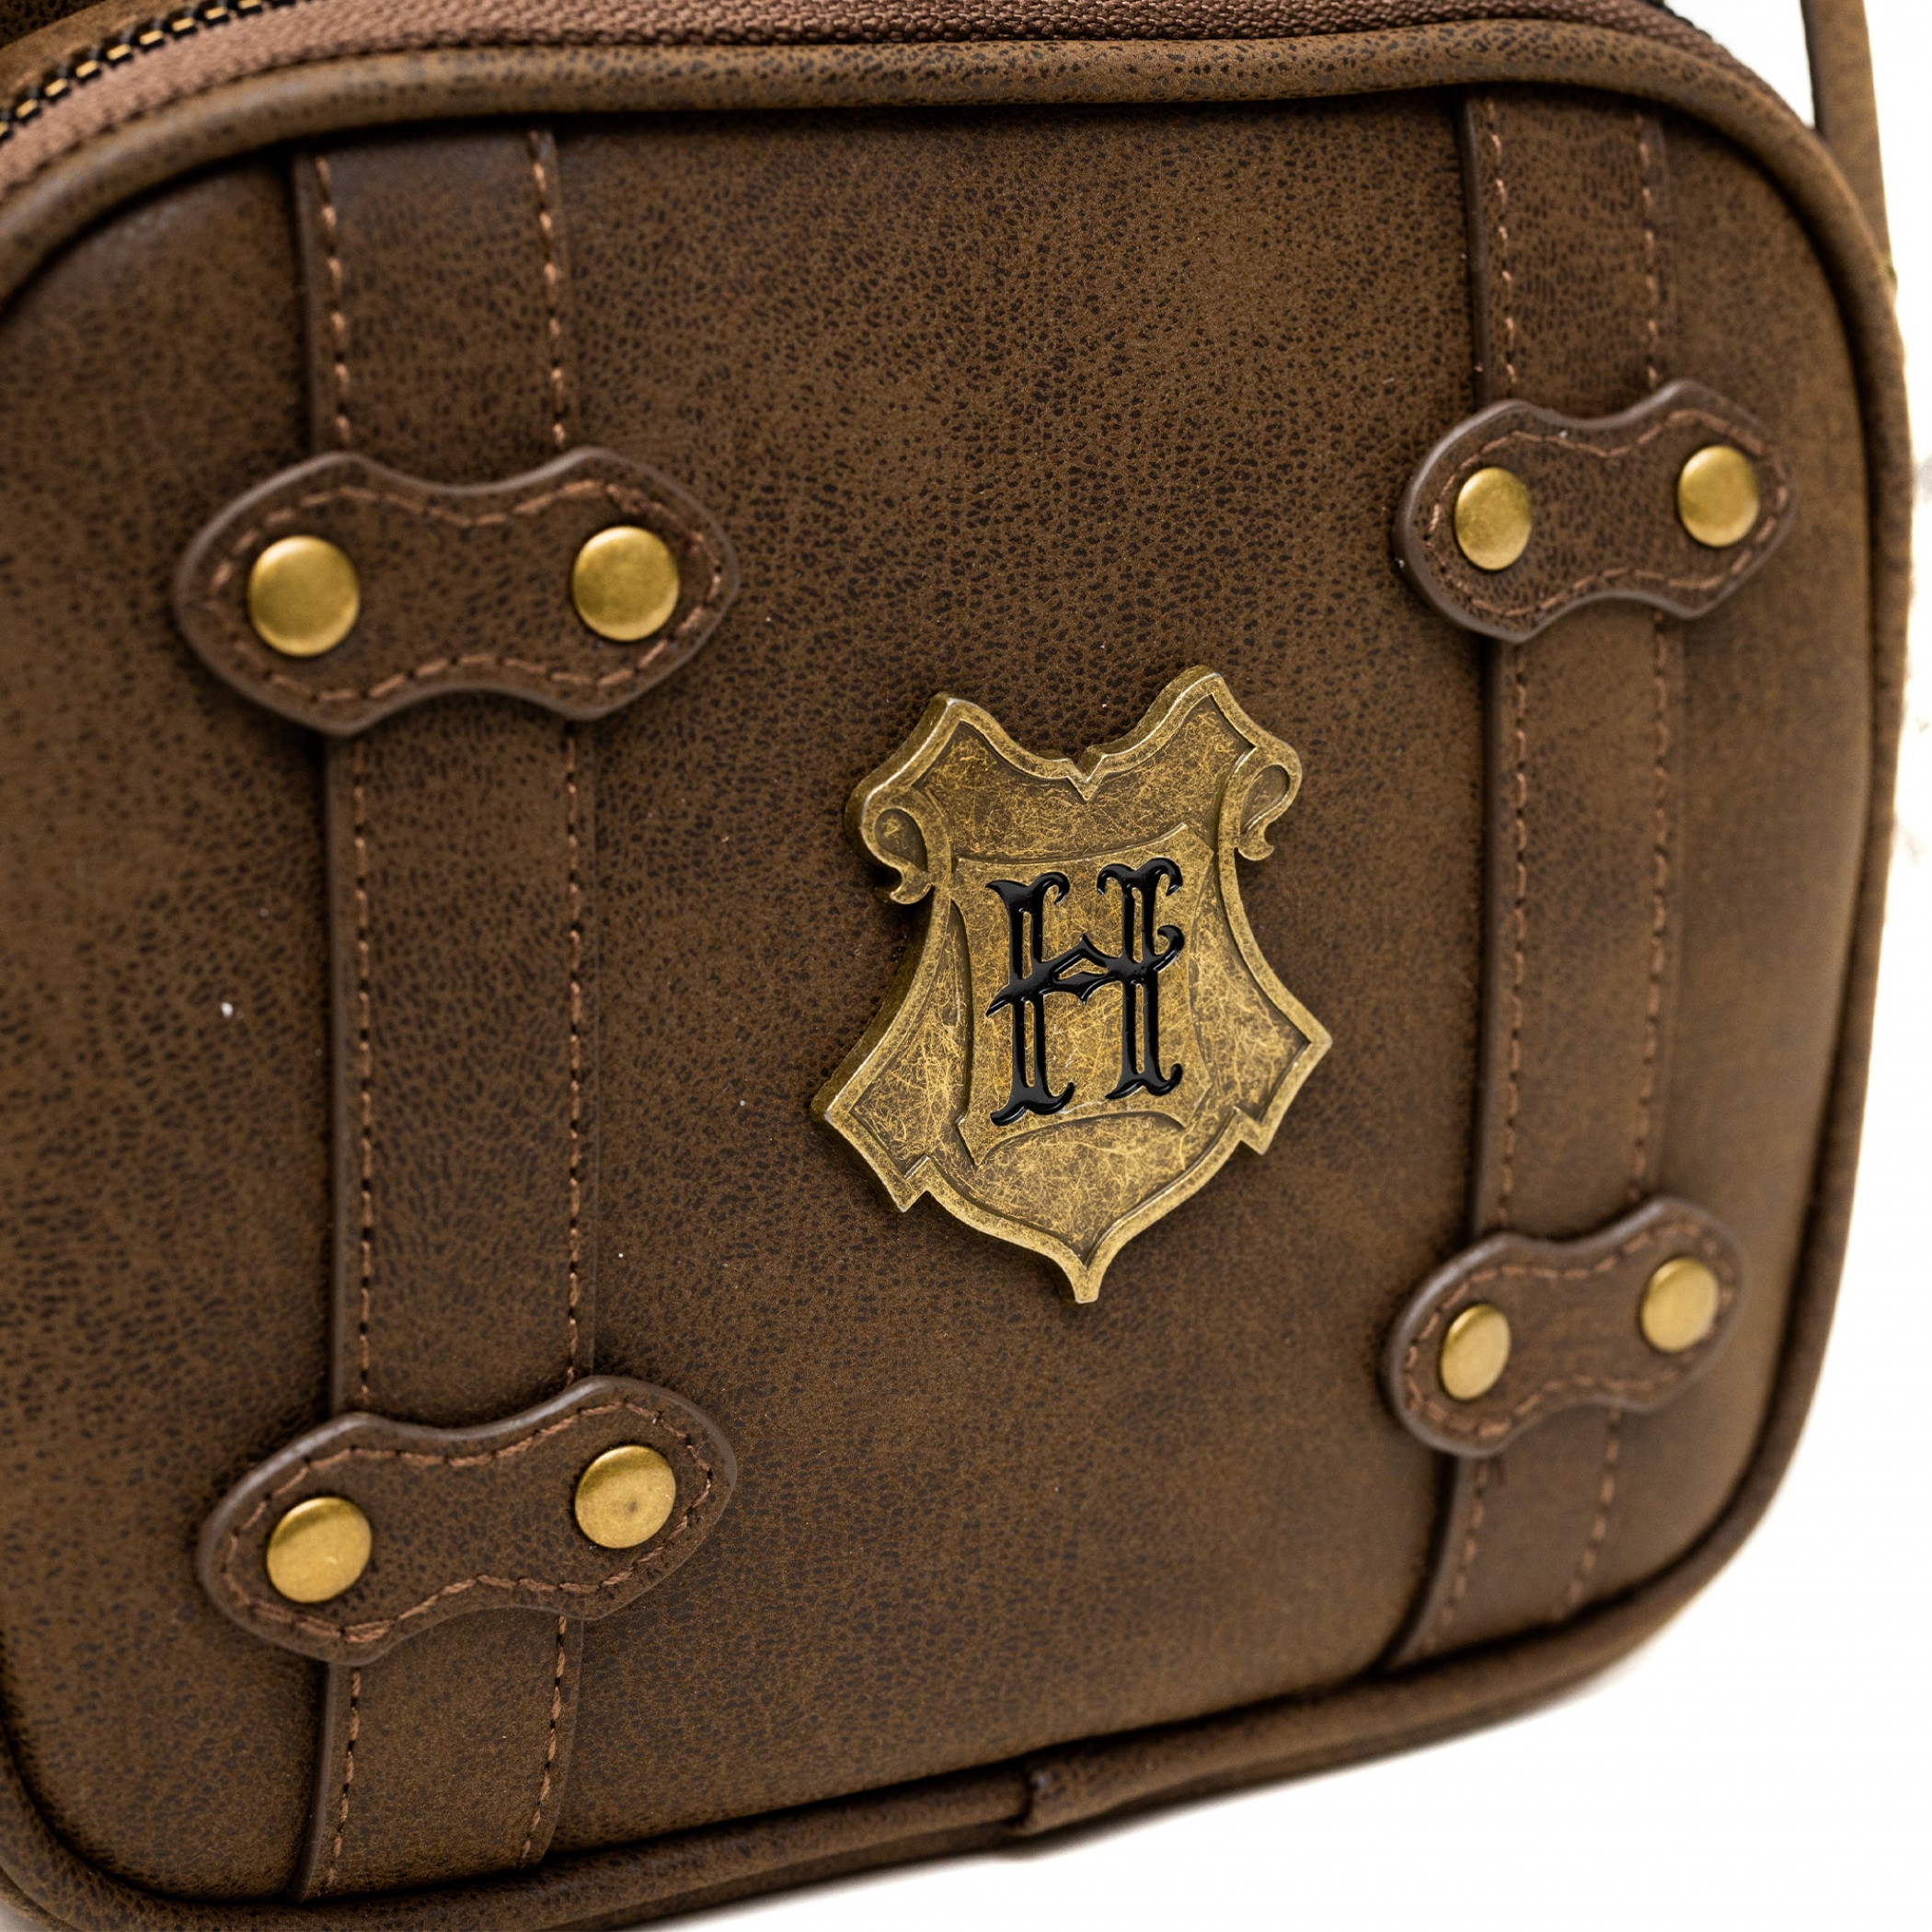 Harry Potter Hogwarts School of Witchcraft and Wizardry Crossbody Bag